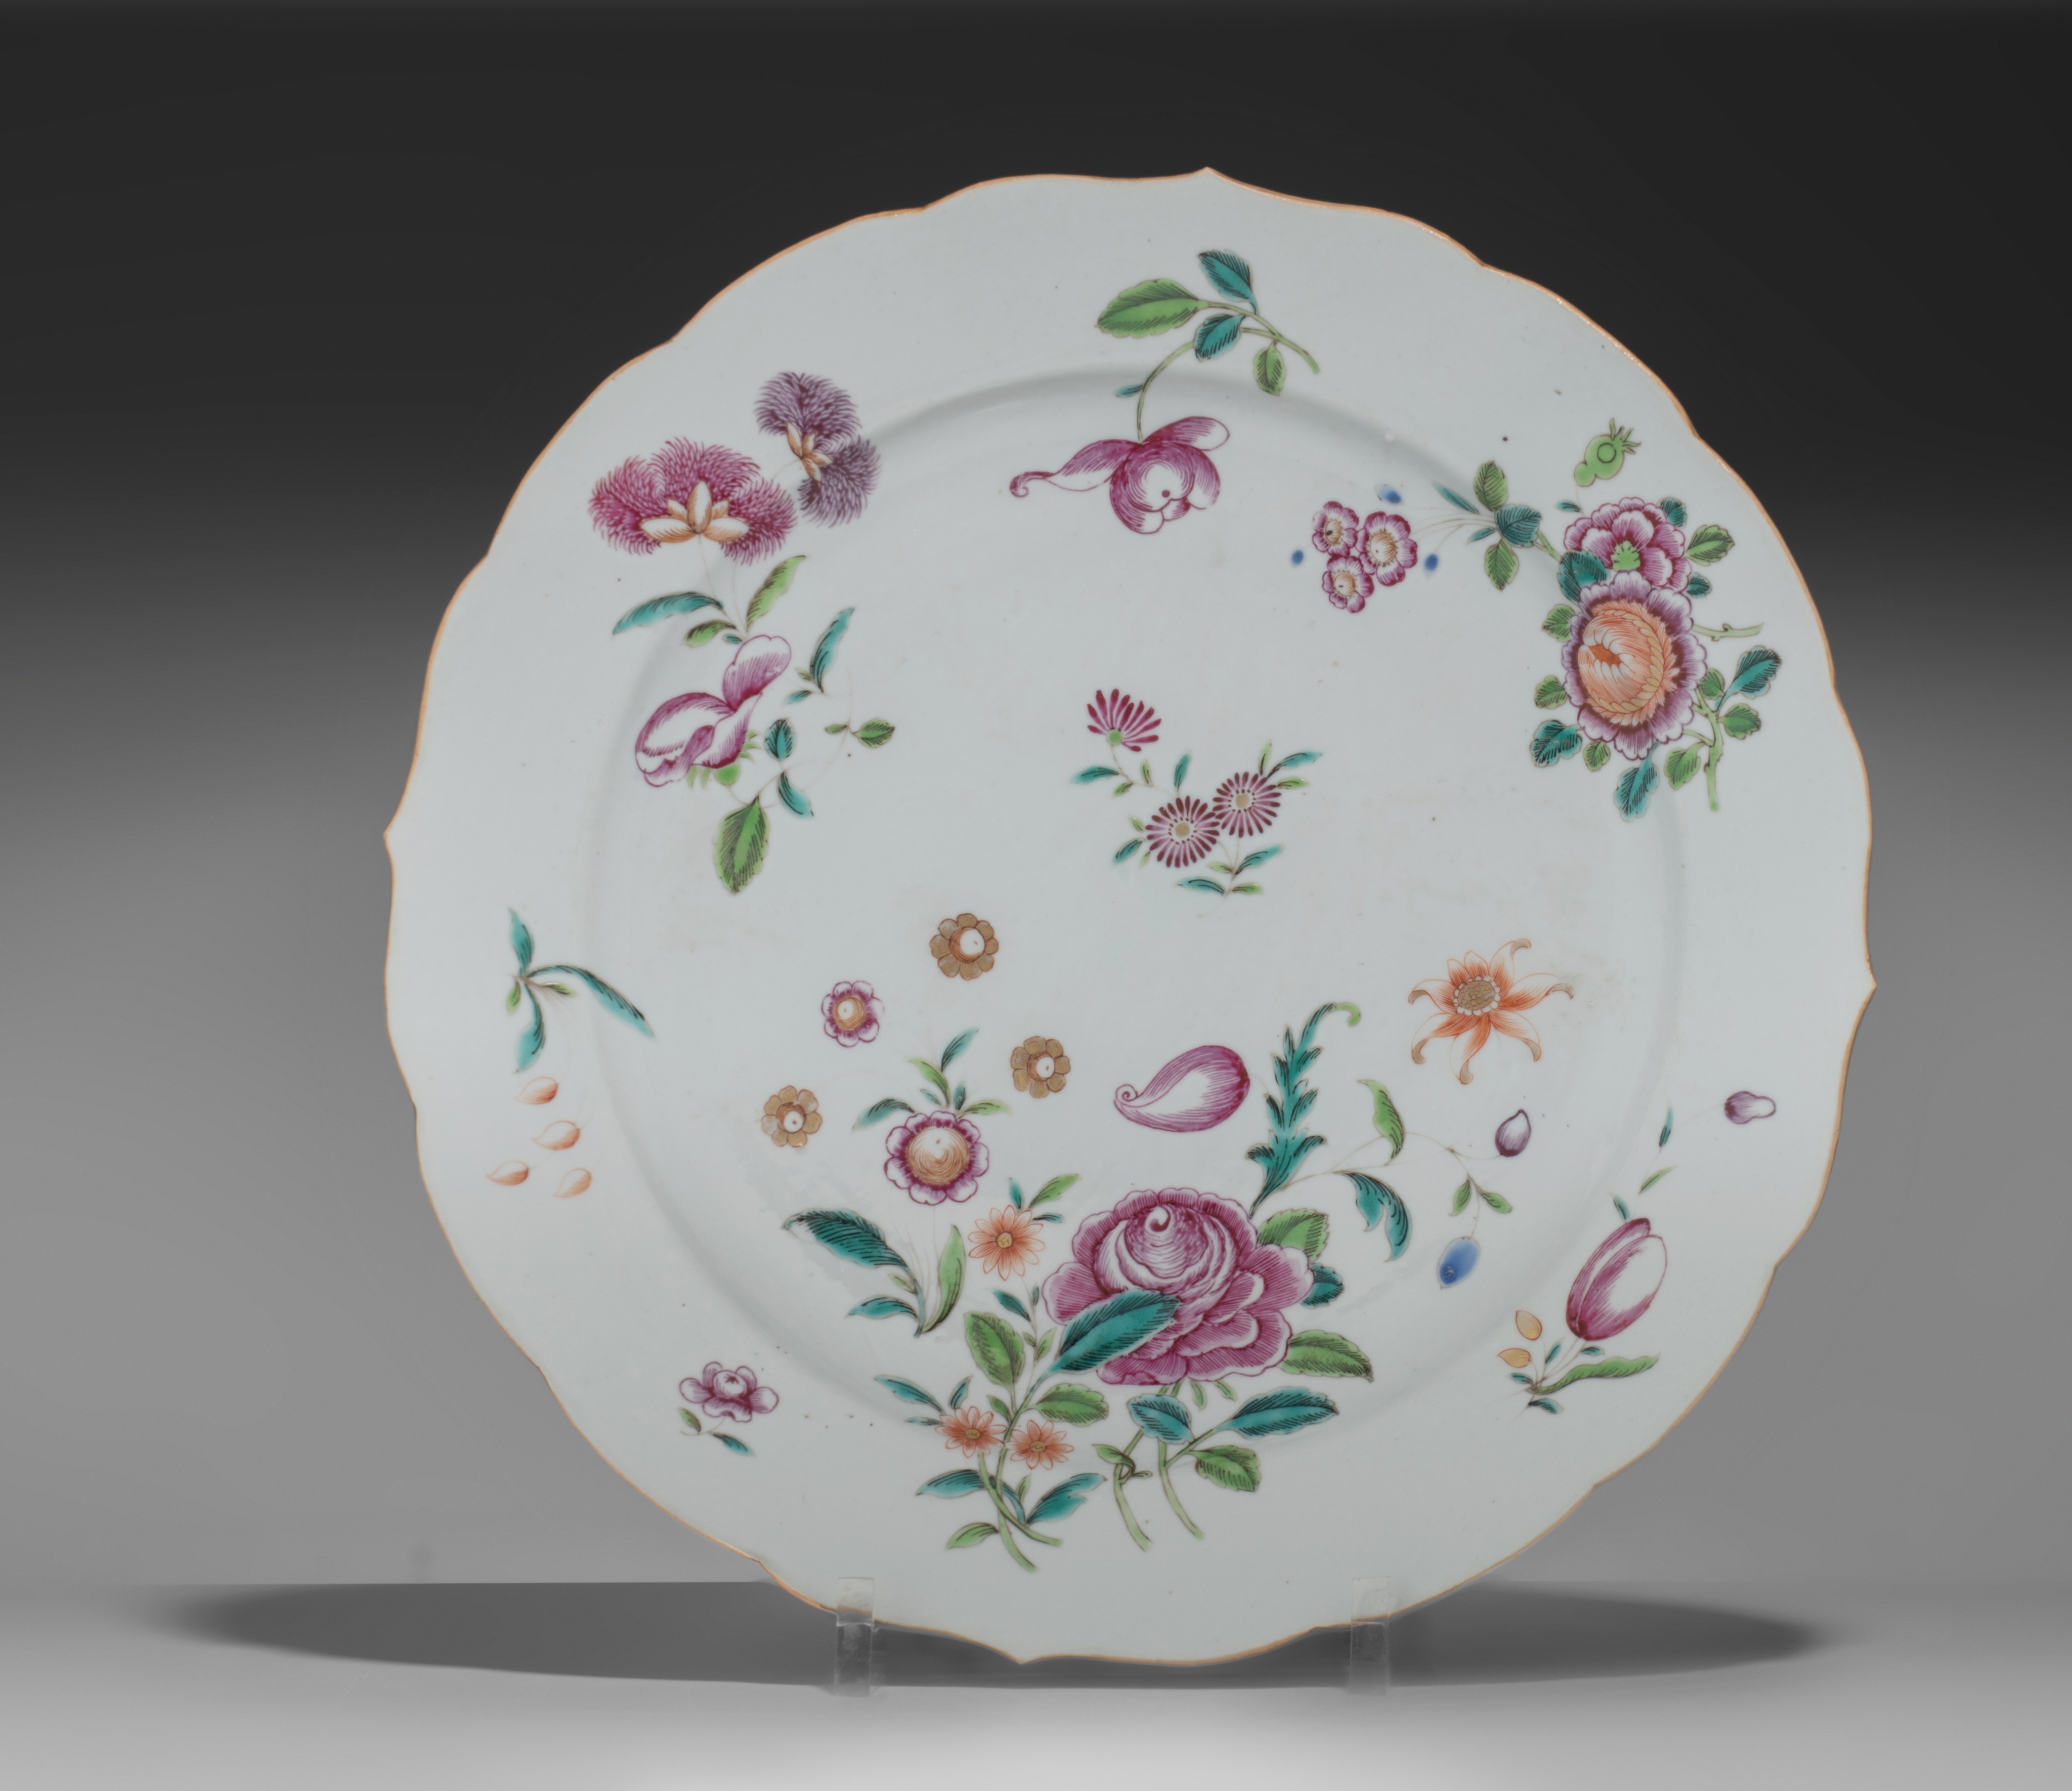 Three Chinese famille rose foliate-shaped export porcelain chargers, 18thC, ø 34,5 - 38 cm - Image 6 of 7